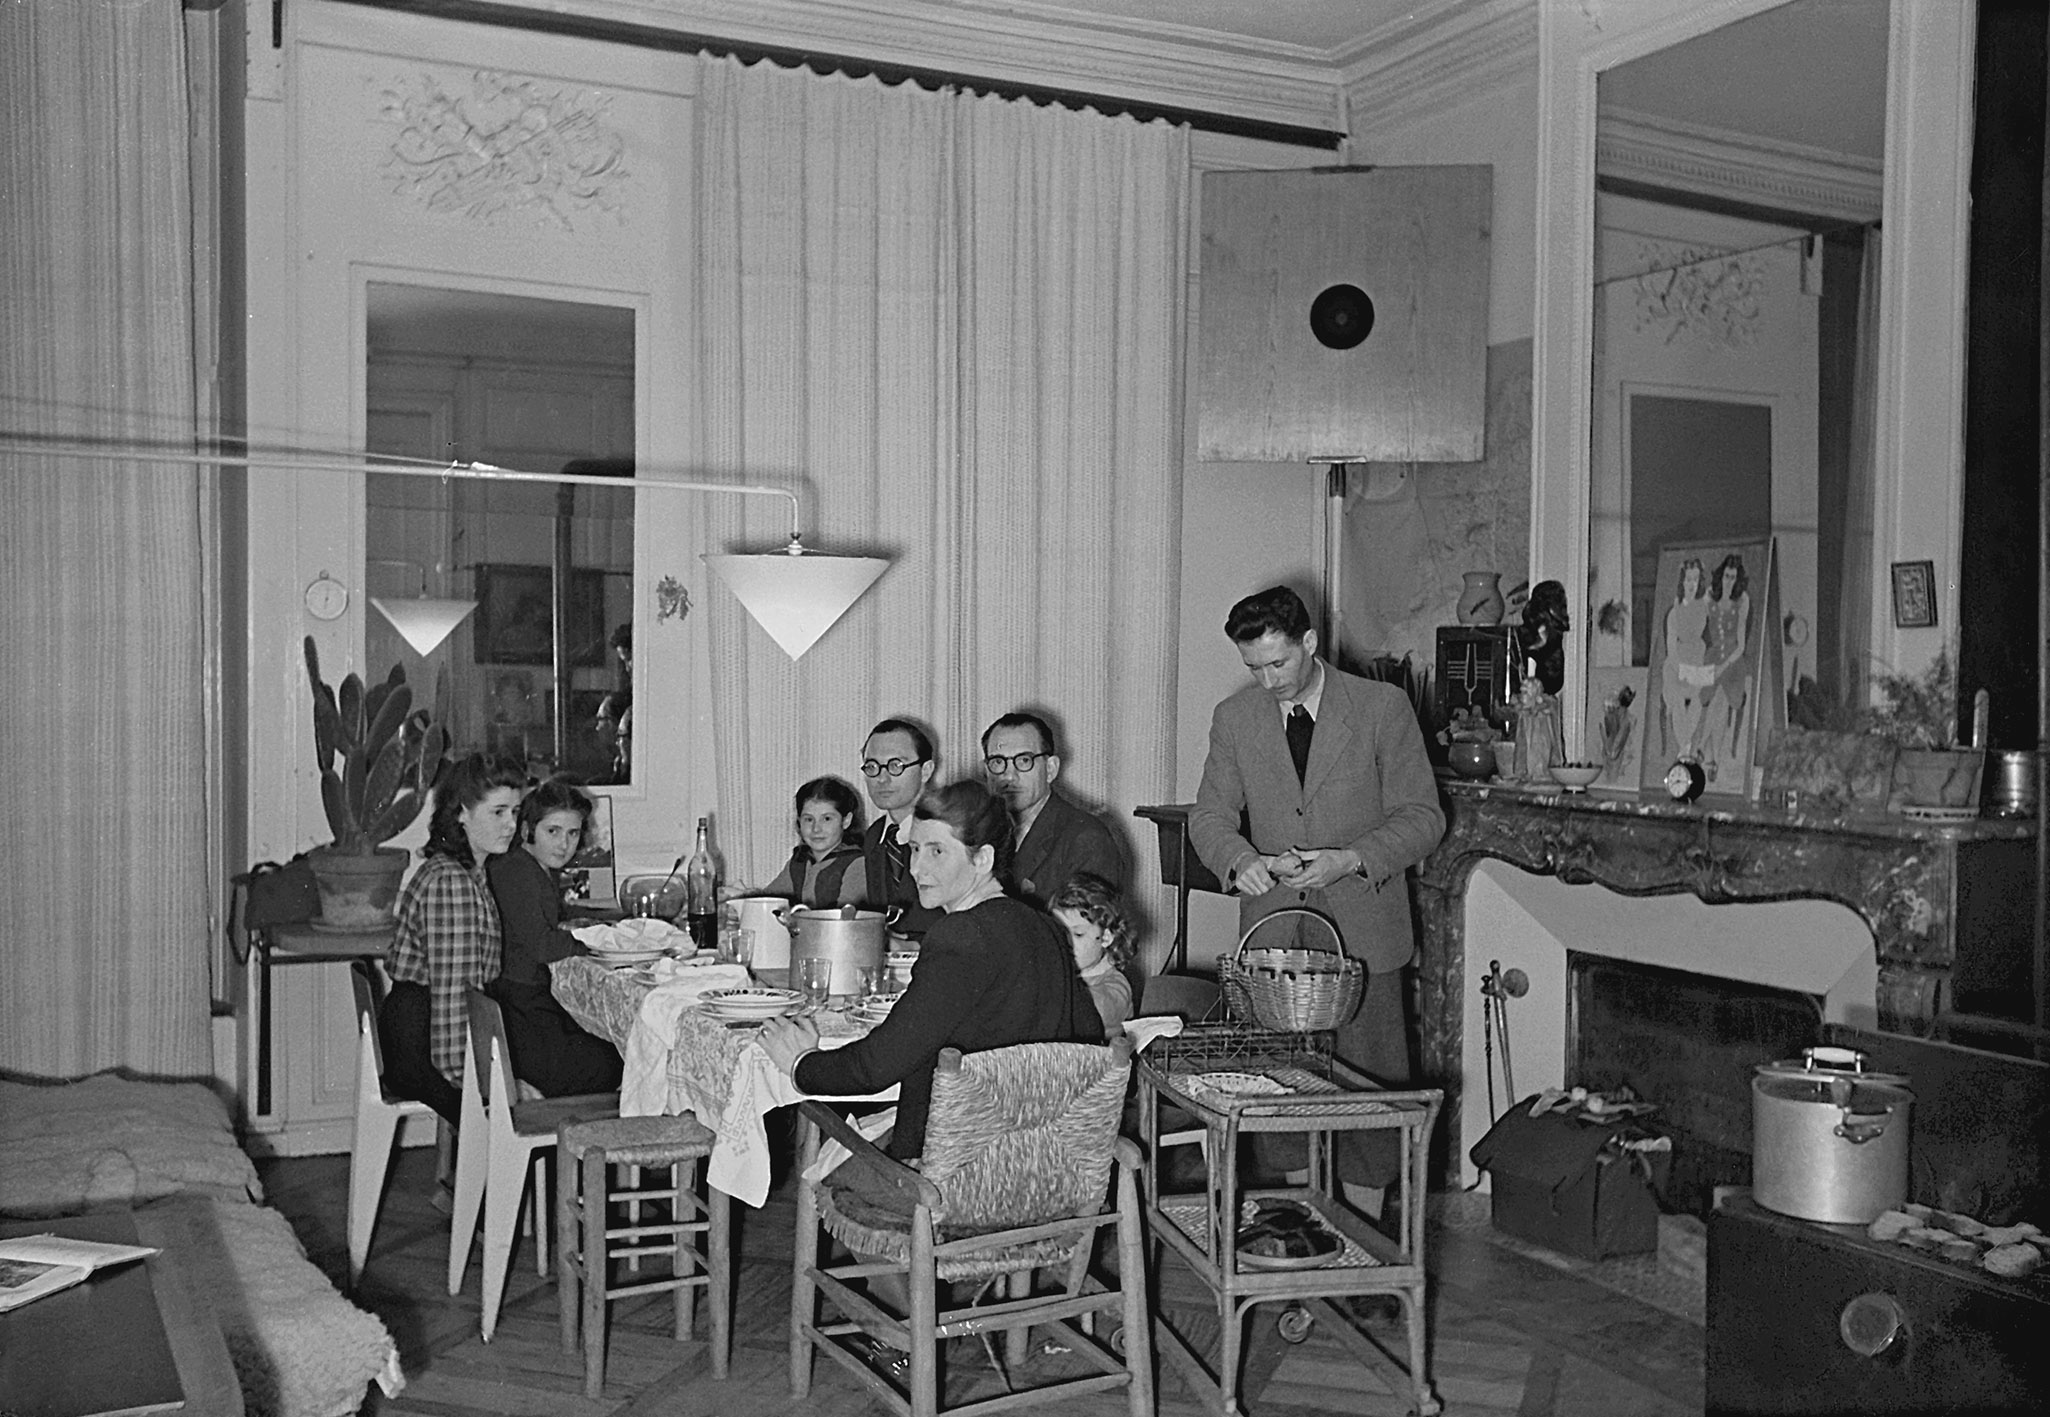 The Prouvé family’s apartment, Place de la Carrière, Nancy. The dining area with a large swing-jib lamp. Straw armchair and stool by Charlotte Perriand. Visit by the Lods family and architect B. Bijvoet, ca. 1945.